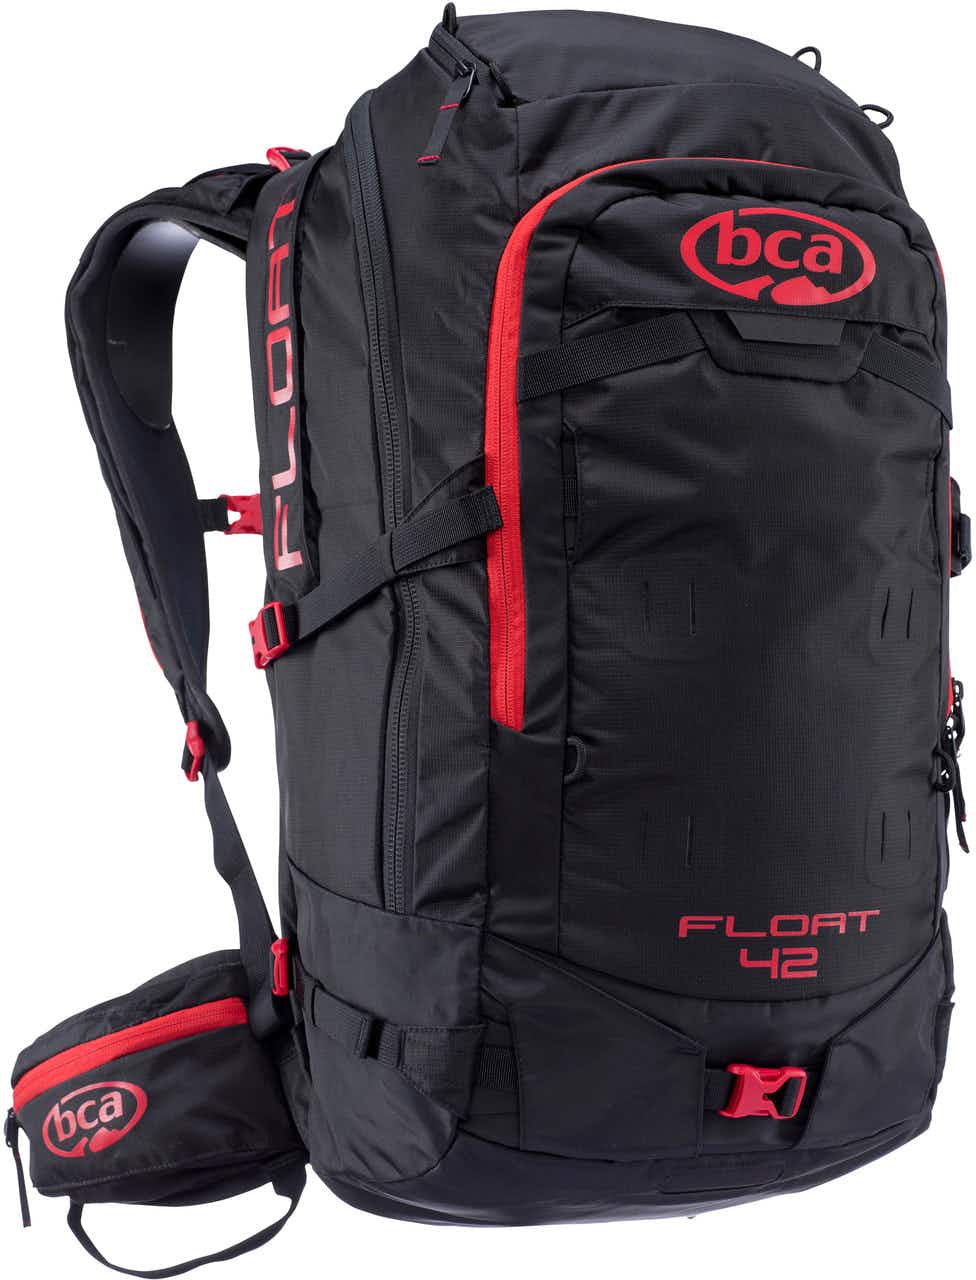 Float 42 Avalanche Airbag Pack Black